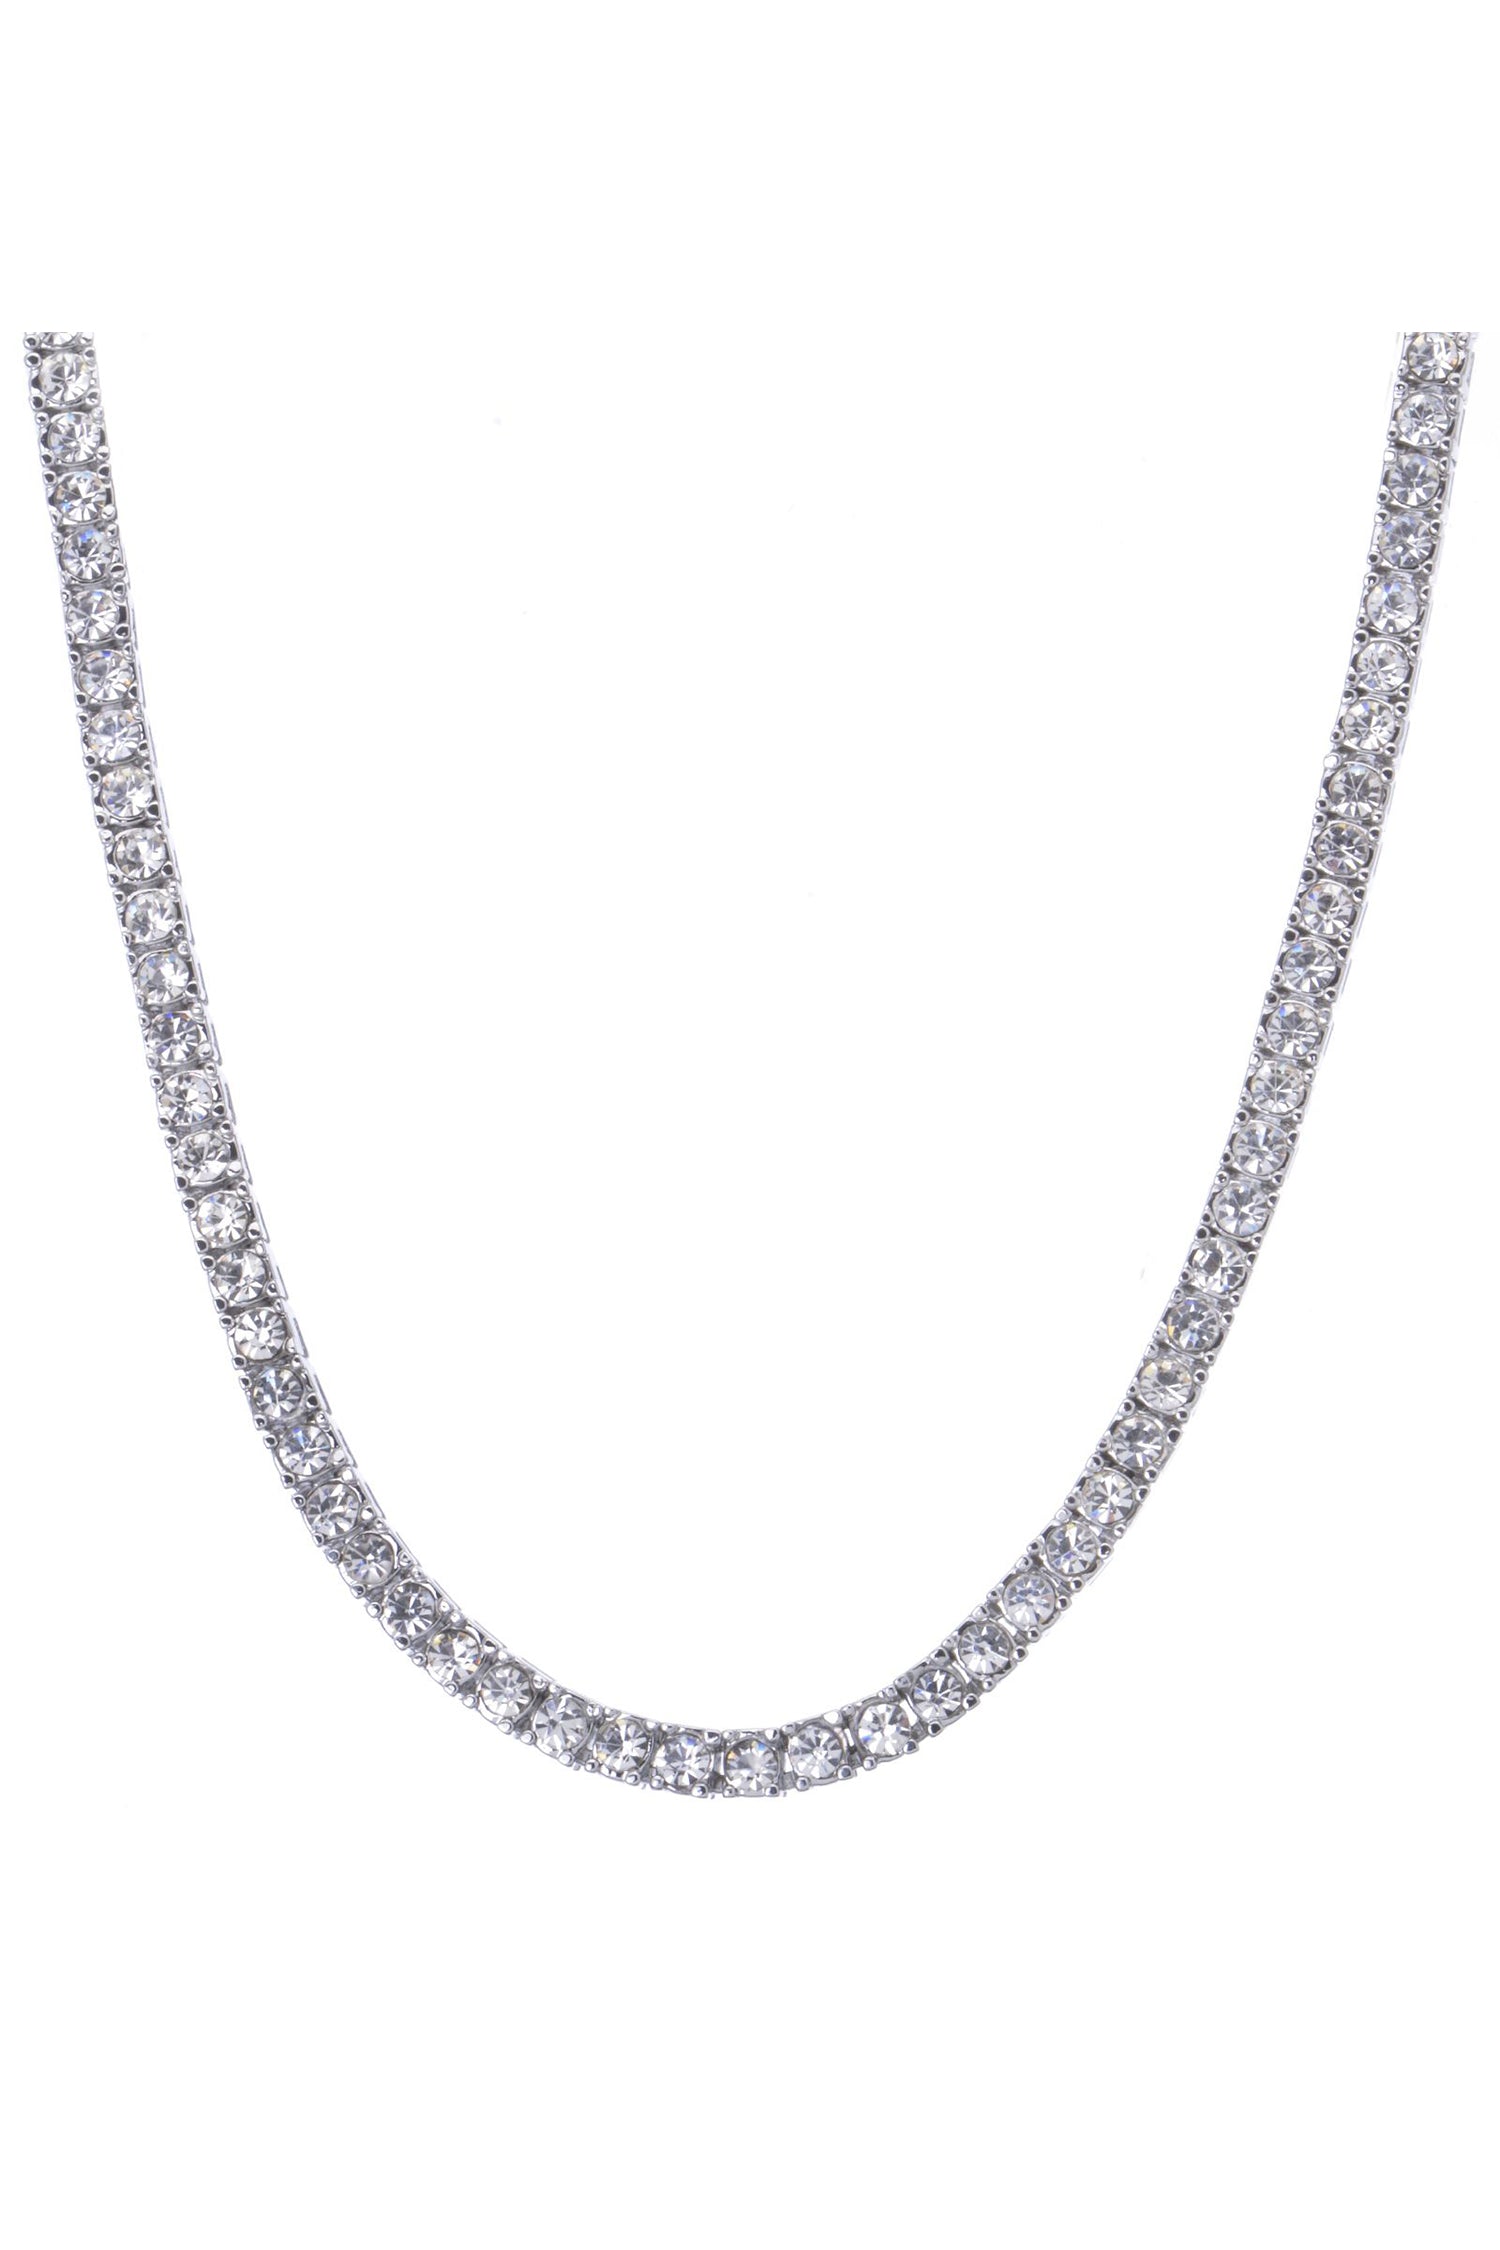 The staple tennis necklace you need!  Illuminated with CZ crystals that beautifully catch light from all angles. It'll look just as great layered with other pieces as it will solo. Let your inner "Bad Girl" shine.   A classic piece you will wear for year to come.  Designed to fit "The True Size Majority" 10-22+